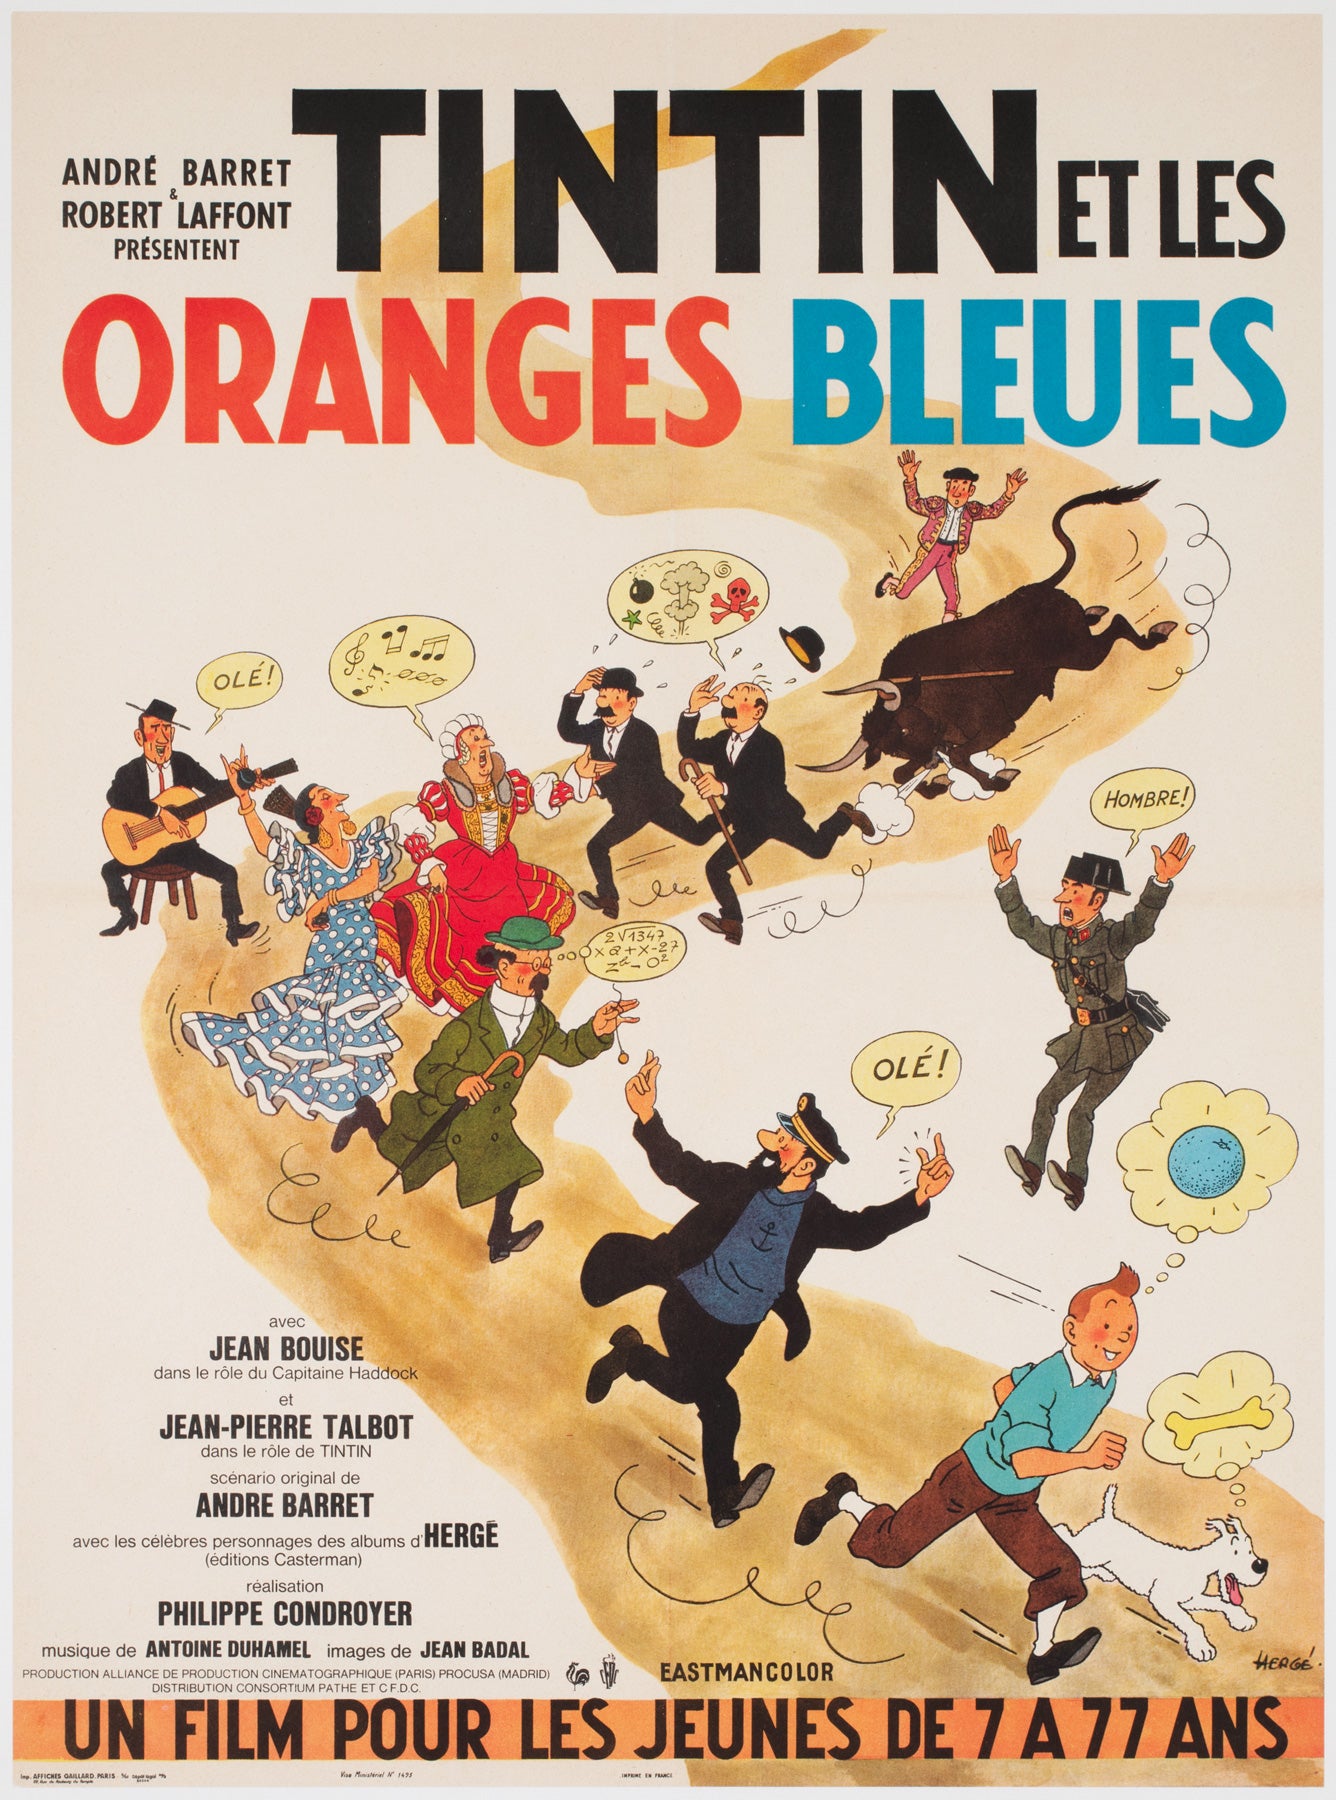 Tintin and the Blue Oranges 1964 French Moyenne Film Poster, Herge